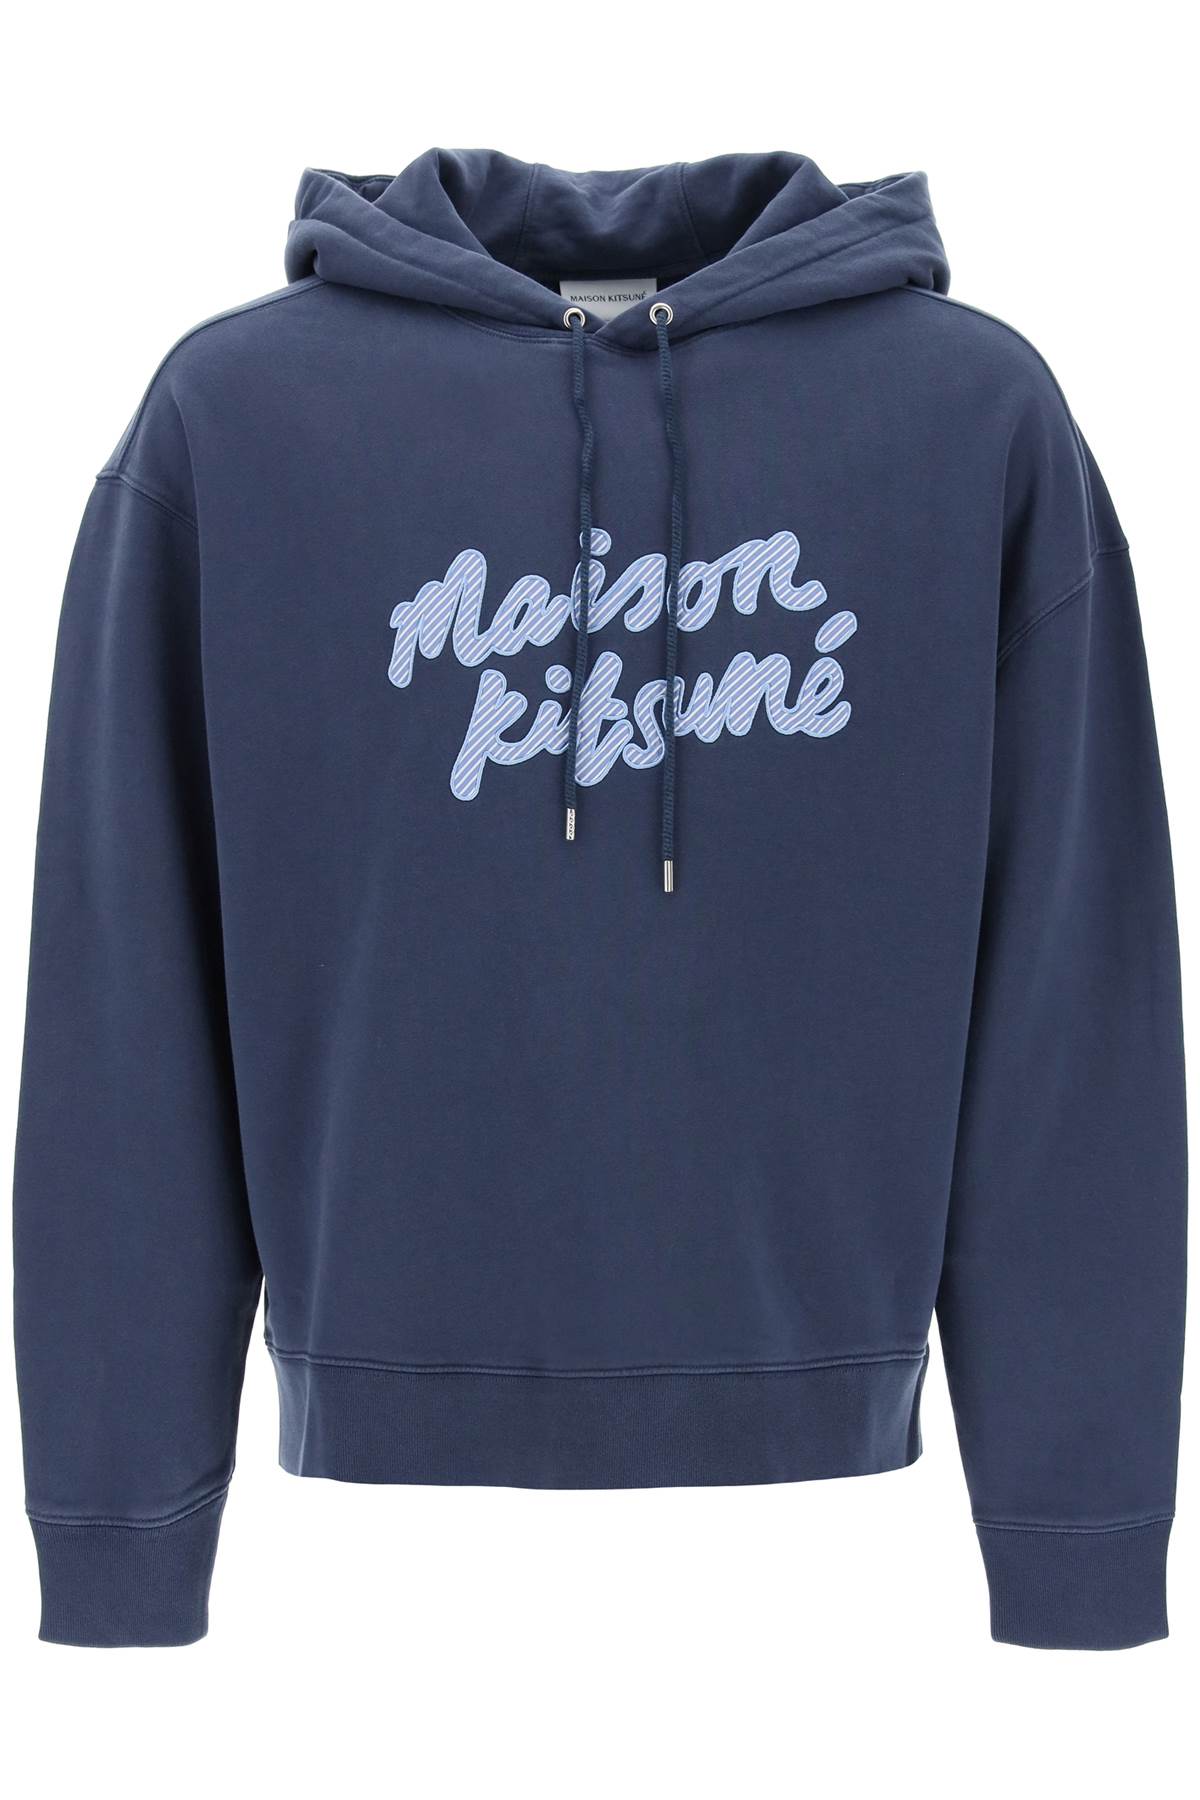 hooded sweatshirt with embroidered logo MM00707KM0001 INK BLUE